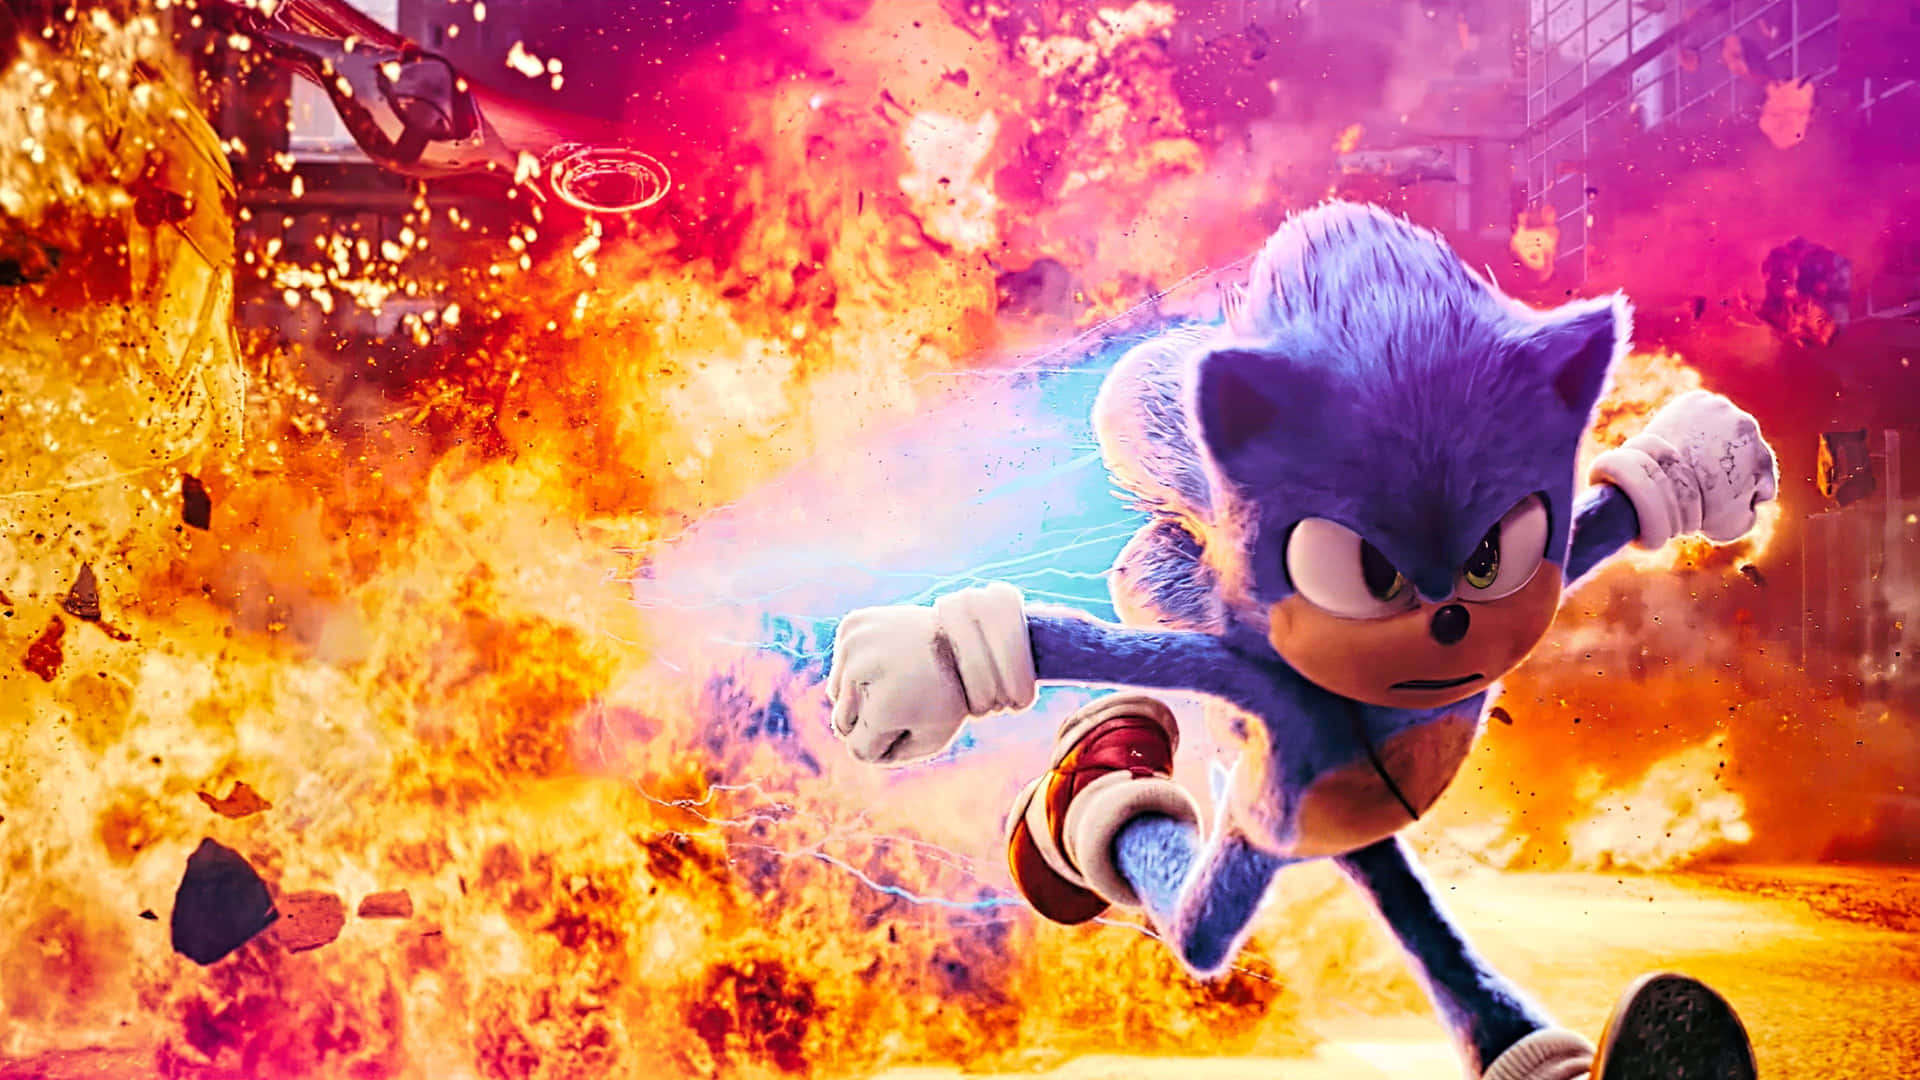 The classic Blue Blur is back - Sonic The Hedgehog 4K Wallpaper